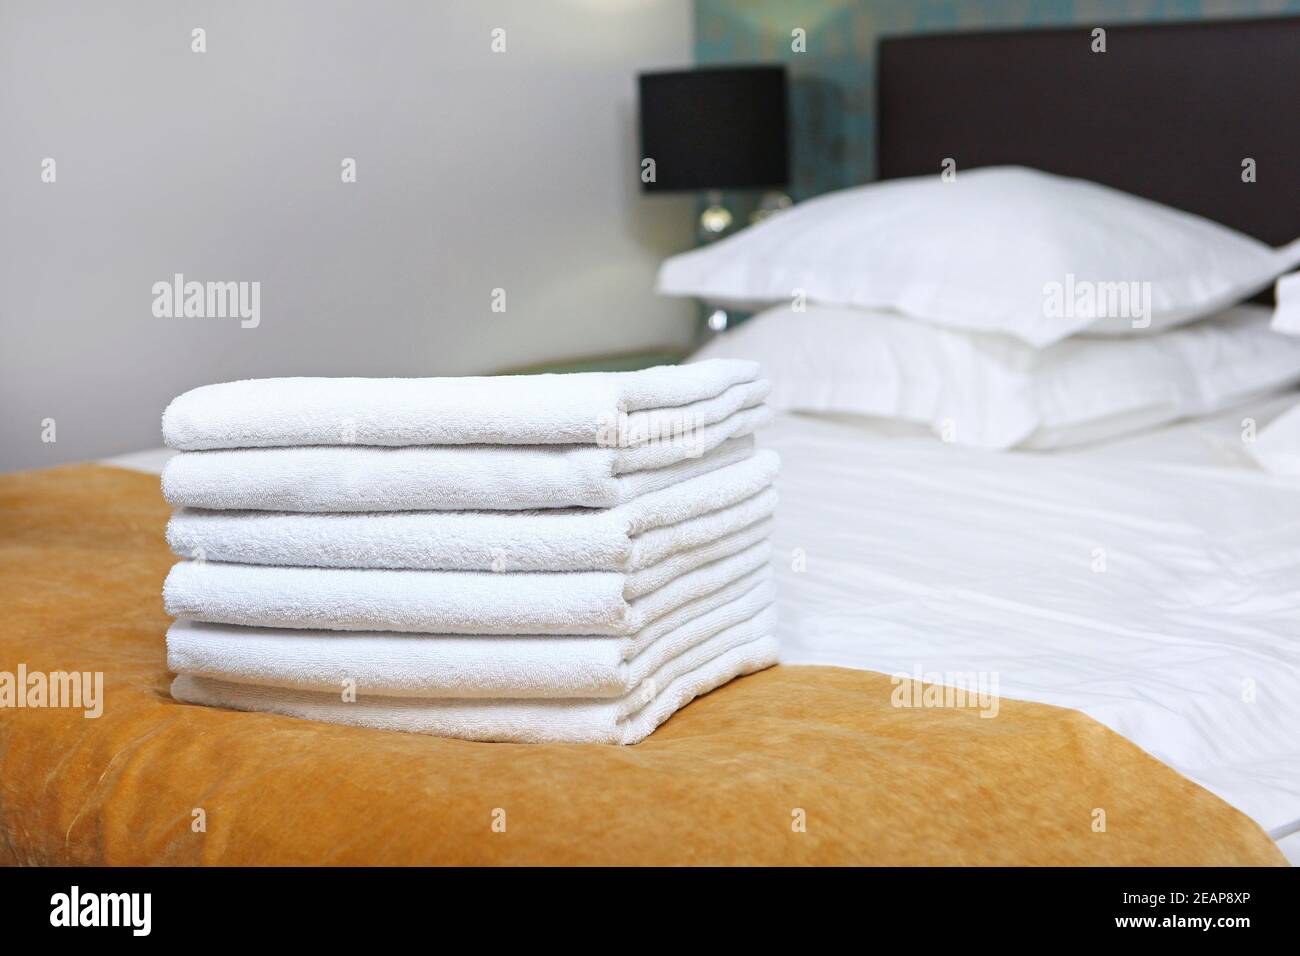 Cleaning of rooms in an expensive hotel. A set of clean towels. Hygiene items. The double bed is out of focus. The concept of quality service in the hotel. Hotel business. Stock Photo